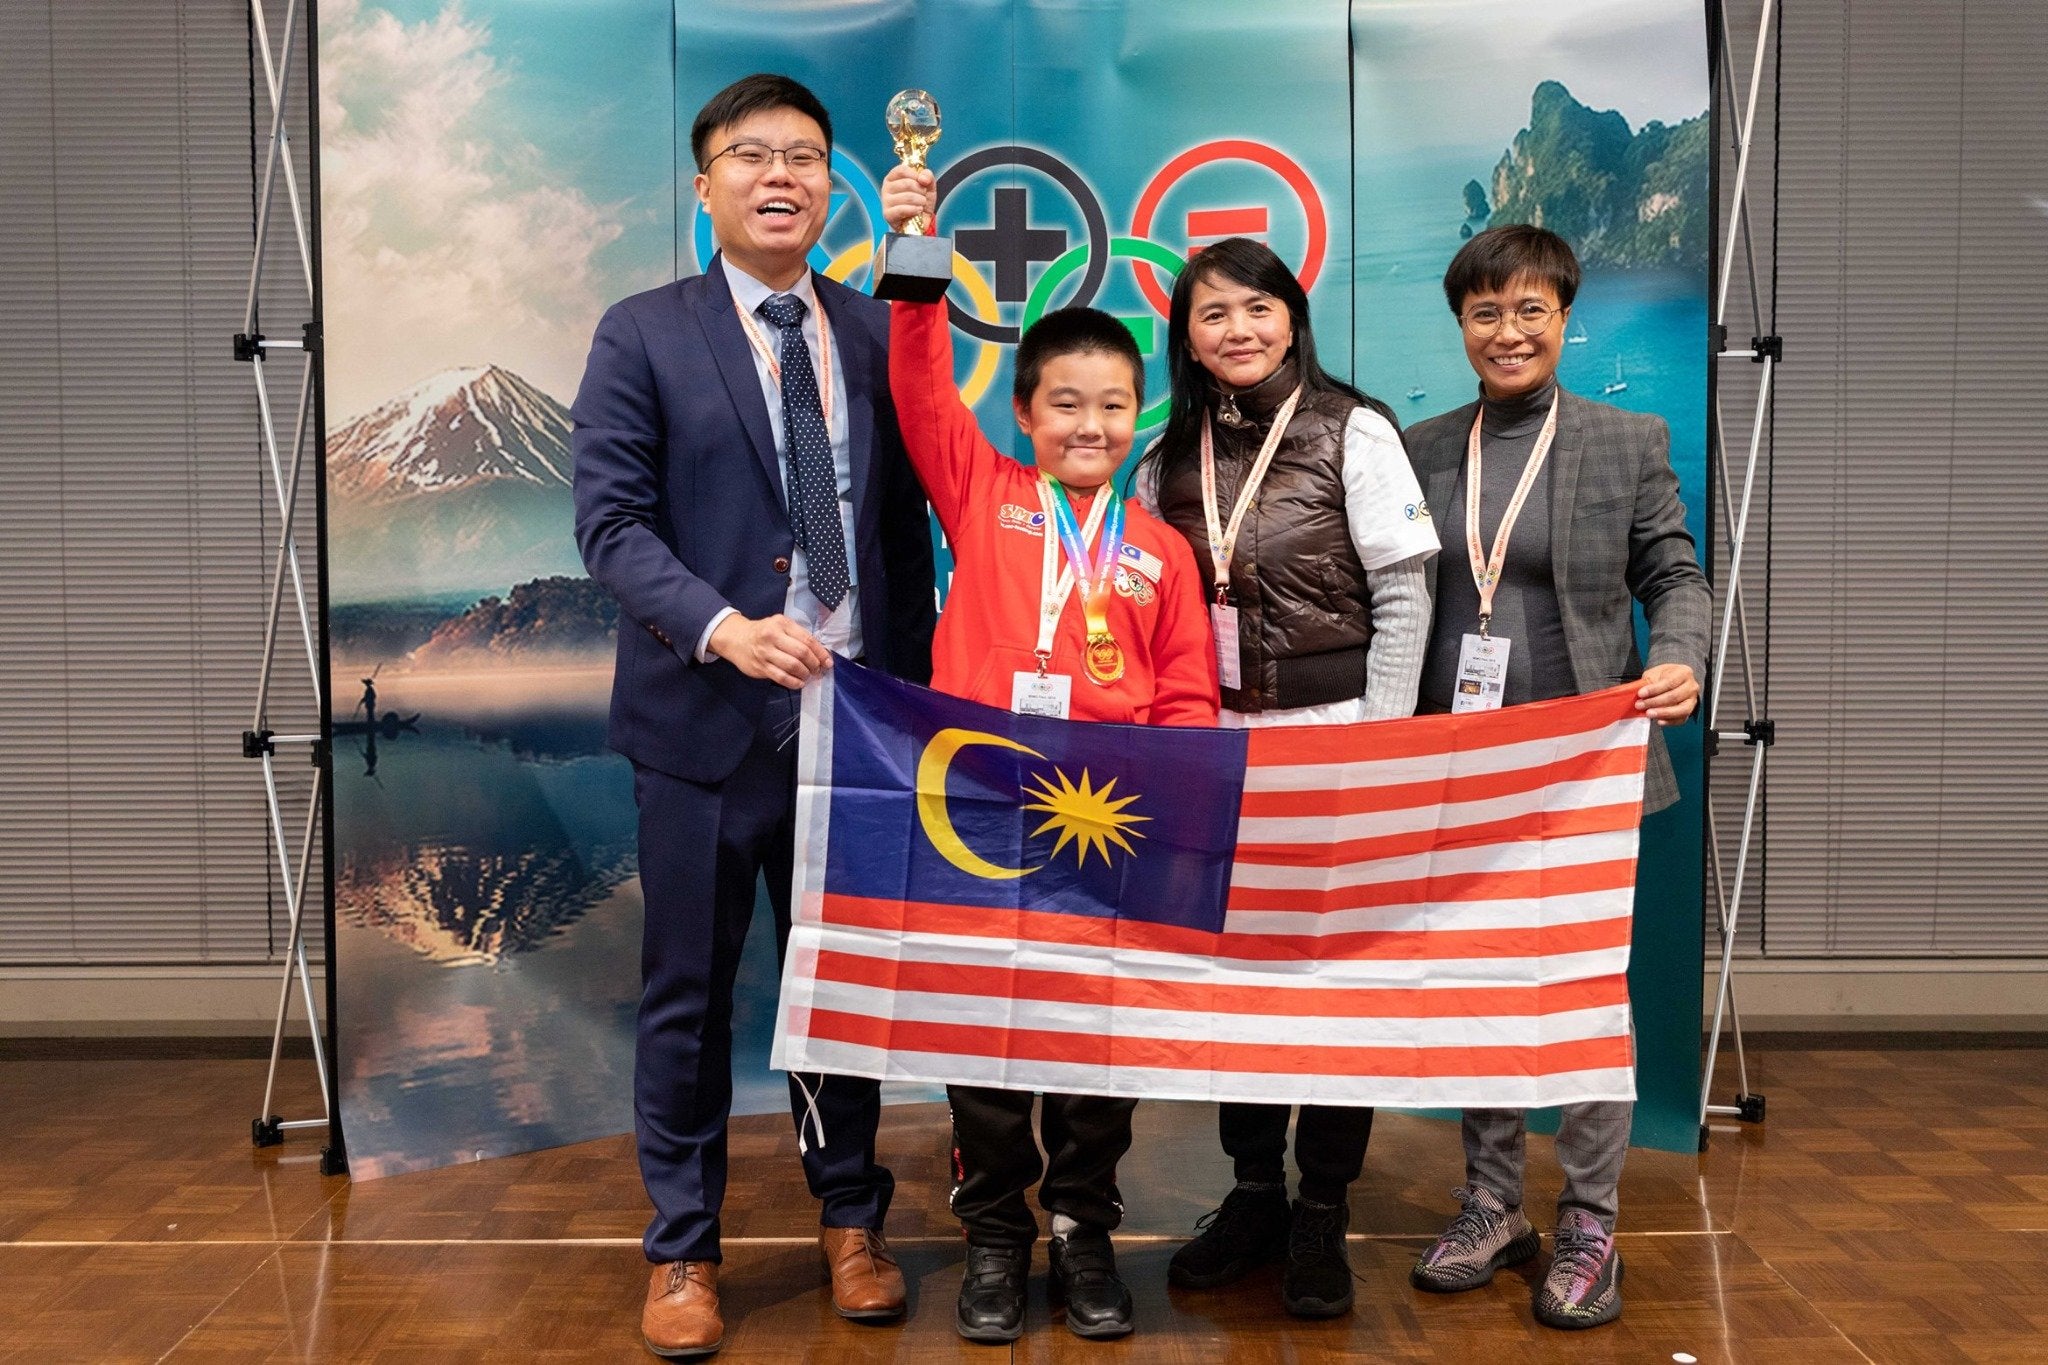 M'sian Primary School Math Geniuses Bag 9 Medals At World Championship In Japan - WORLD OF BUZZ 1